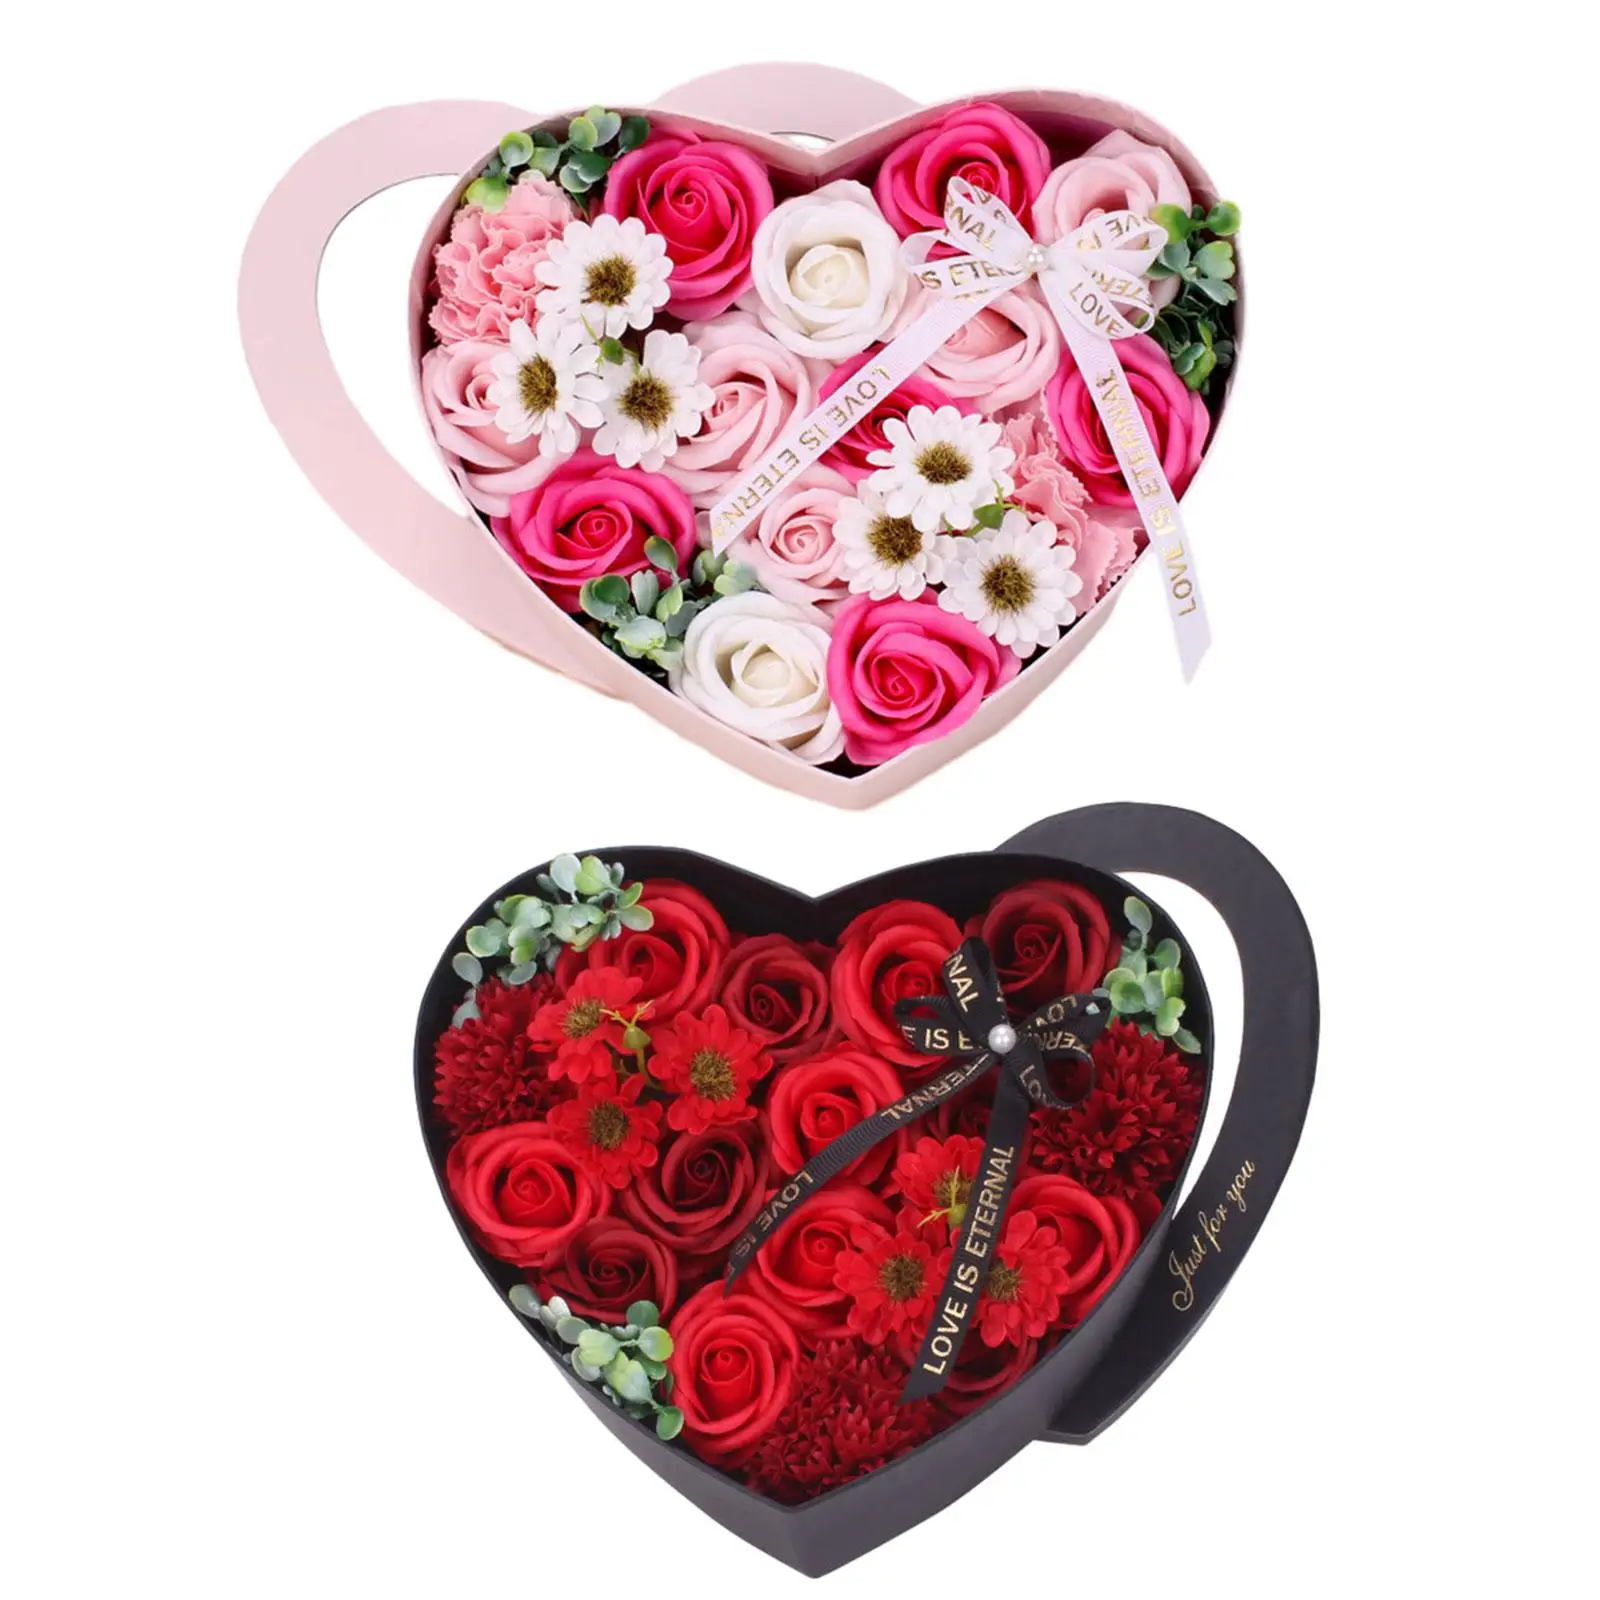 Roses Flower Box Valentines Day Decor Heart Shape Box for Indoor Outdoor Men